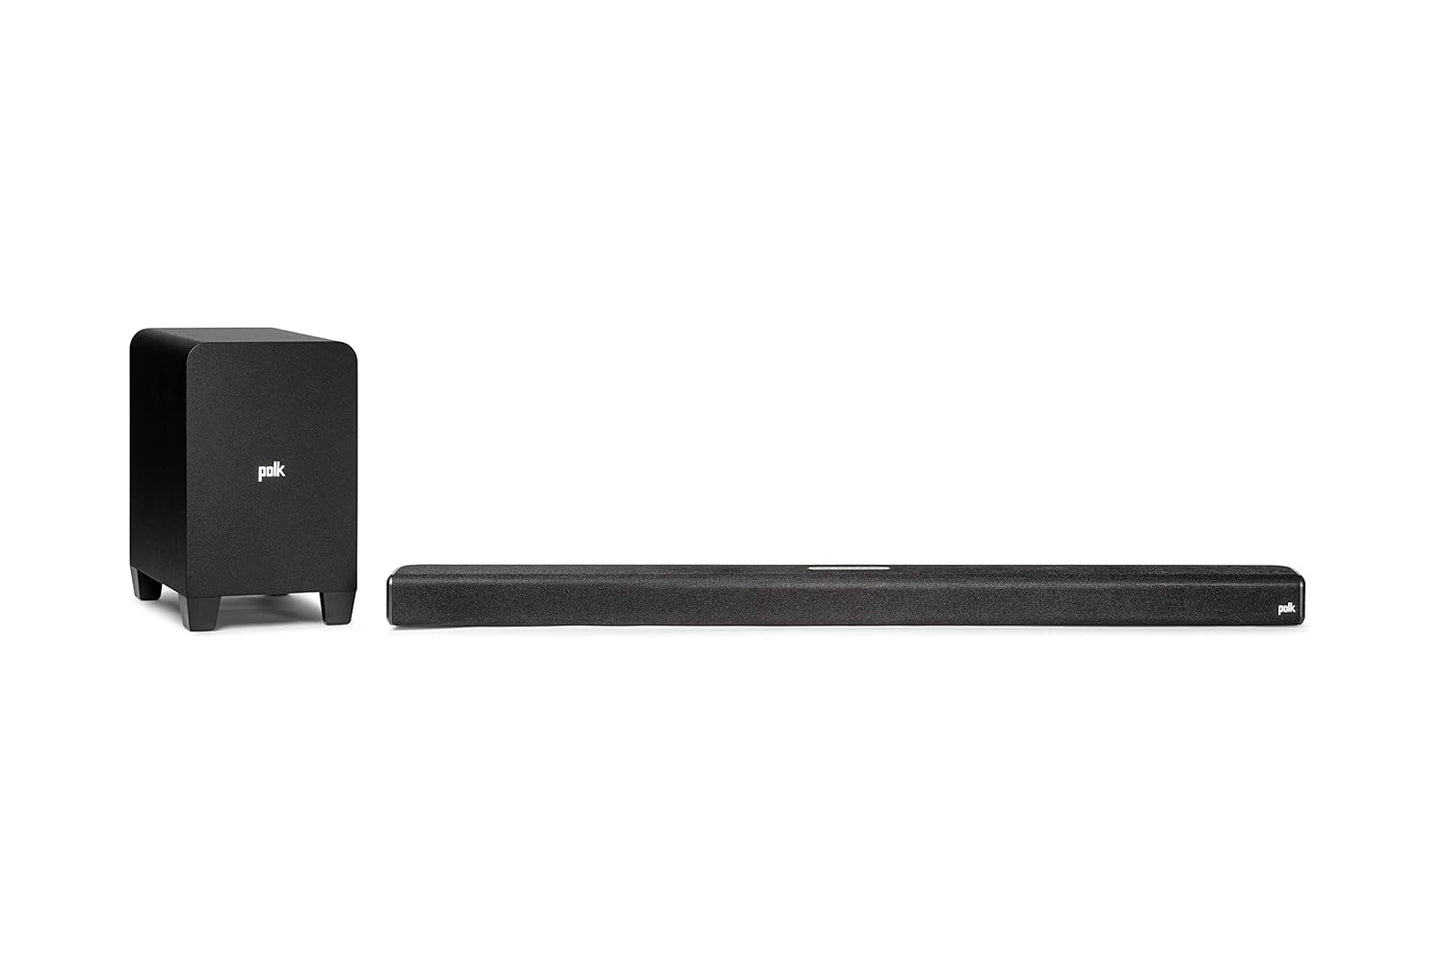 Polk Signa S4 True Dolby Atmos Sound Bar With Wireless Subwoofer, Earc, And Blutooth